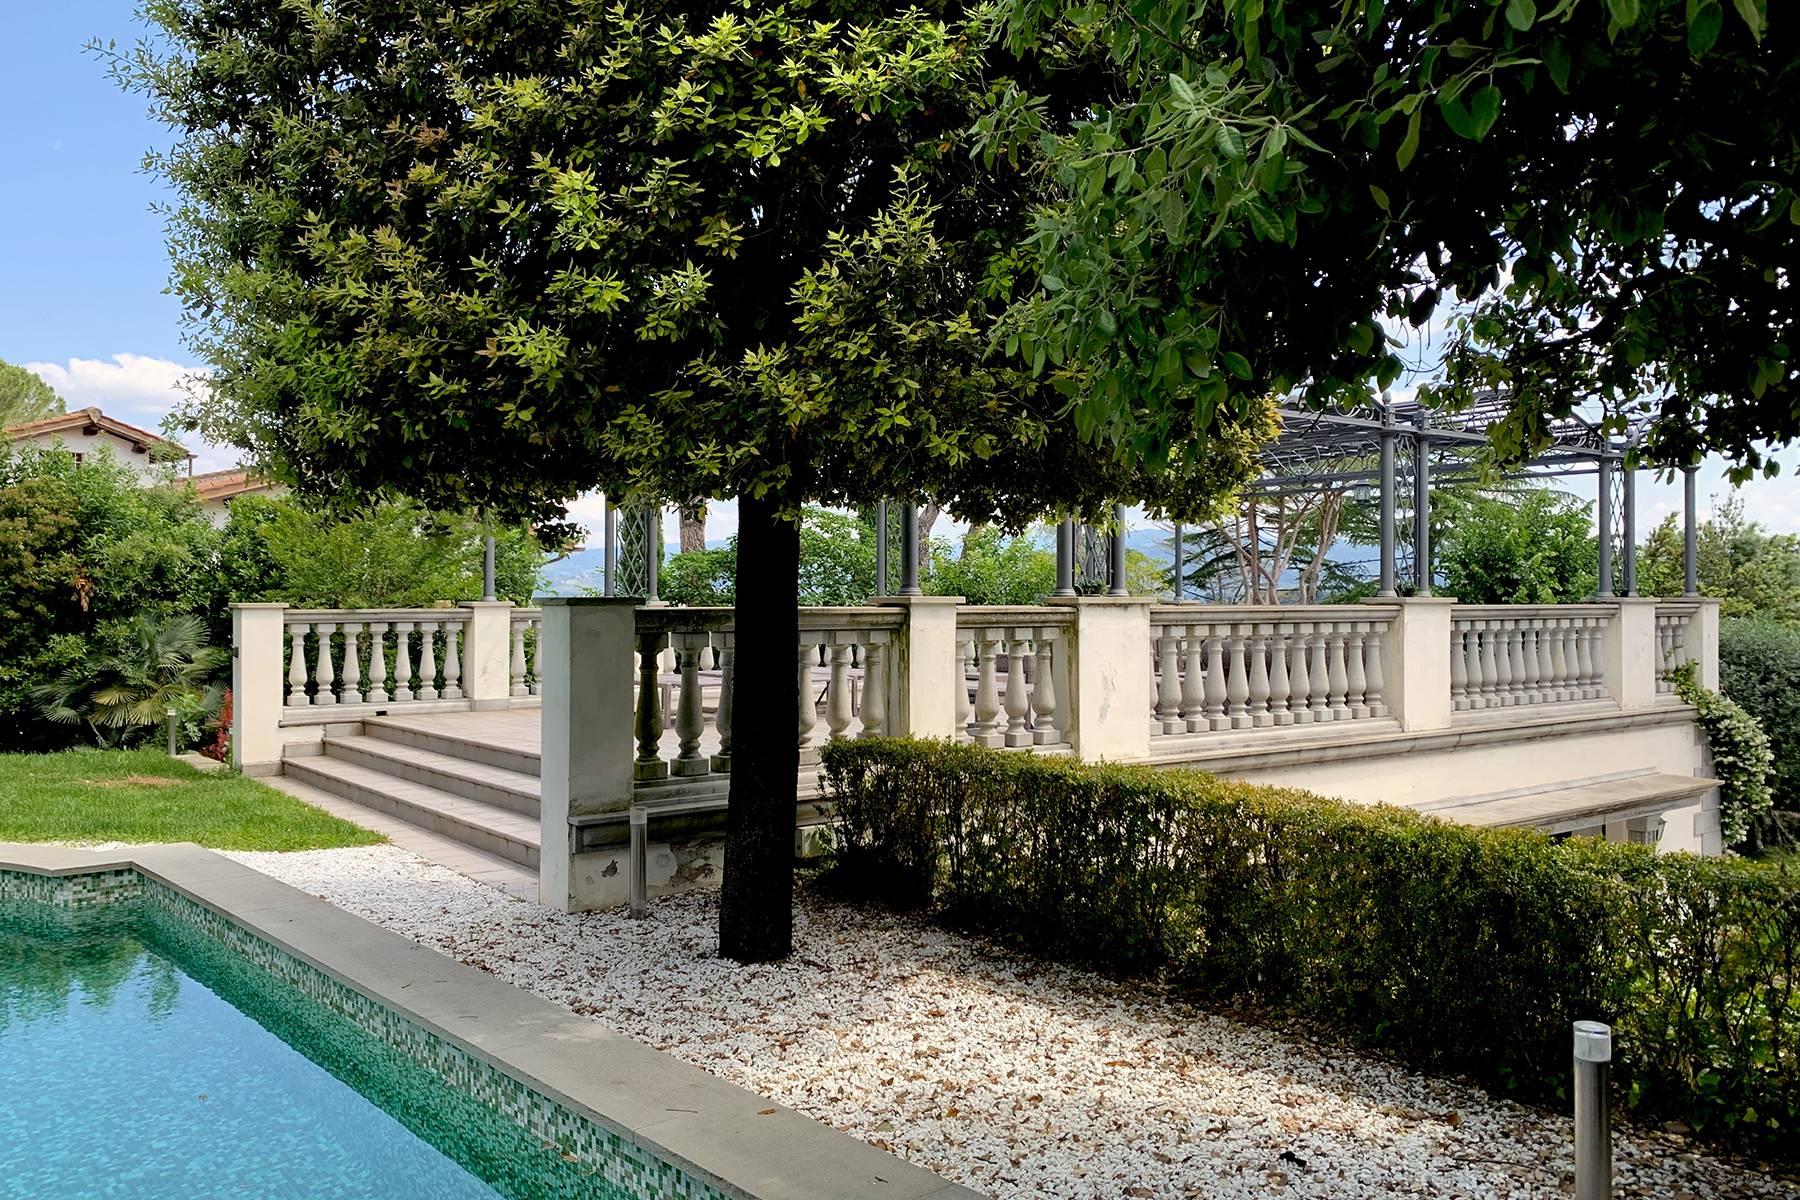 Splendid villa with pool on the Poggio Imperiale hill in Florence - 11